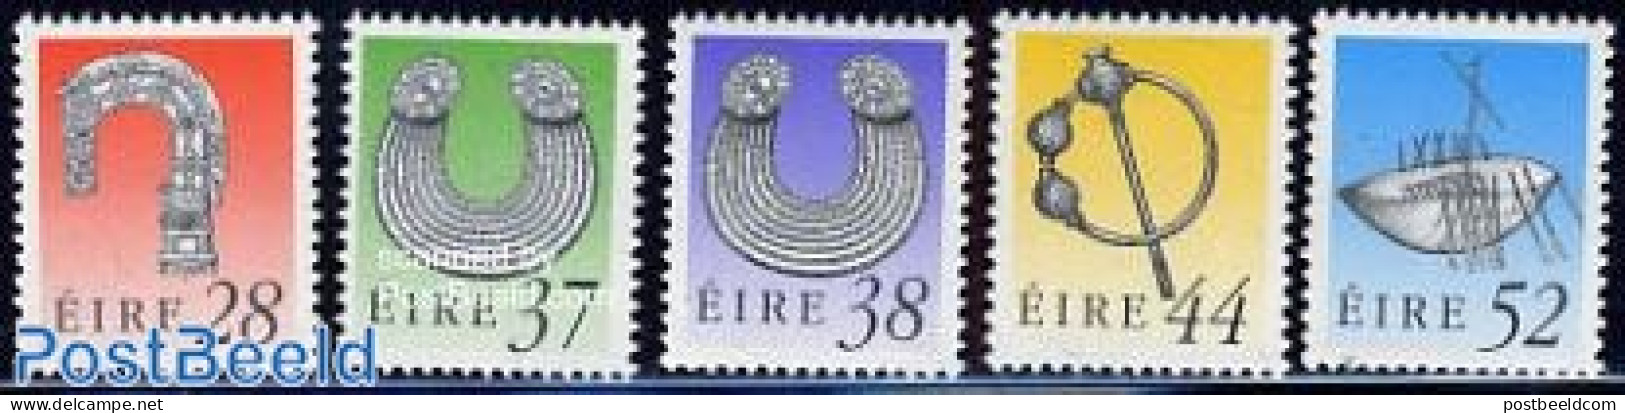 Ireland 1991 Definitives 5v, Mint NH, Art - Art & Antique Objects - Unused Stamps